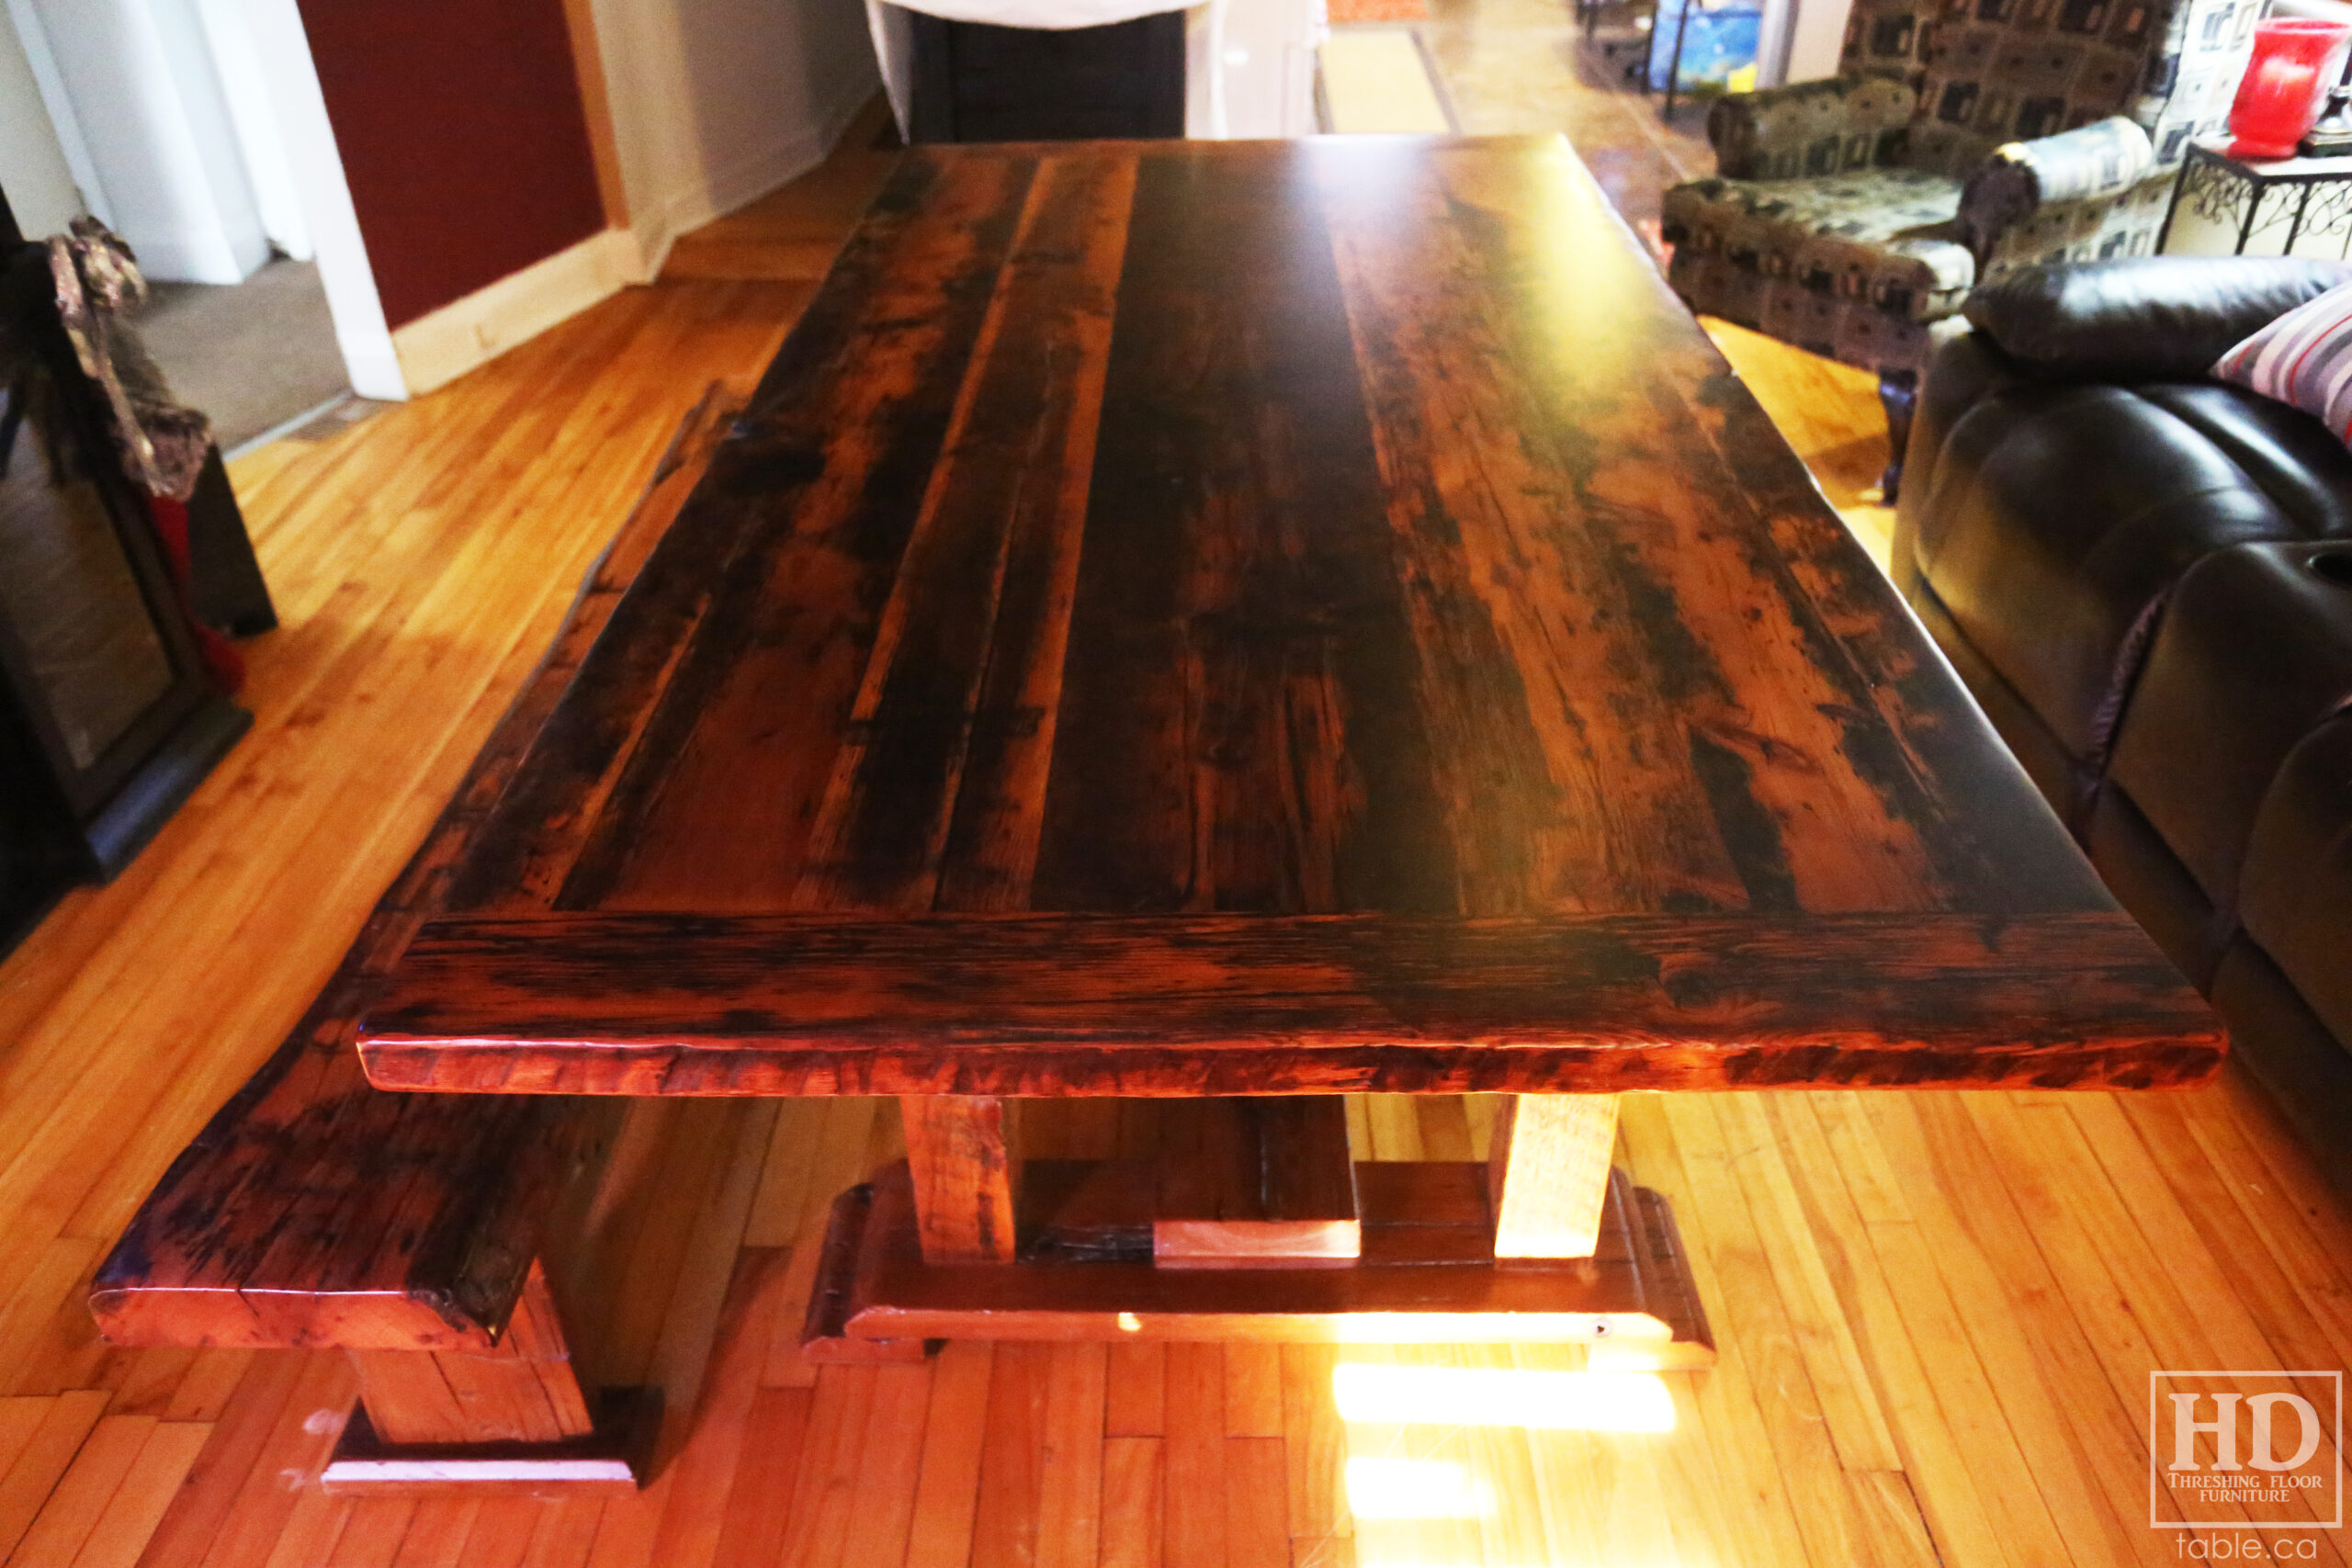 Reclaimed Wood Table with Frame Base by HD Threshing Floor Furniture / www.table.ca